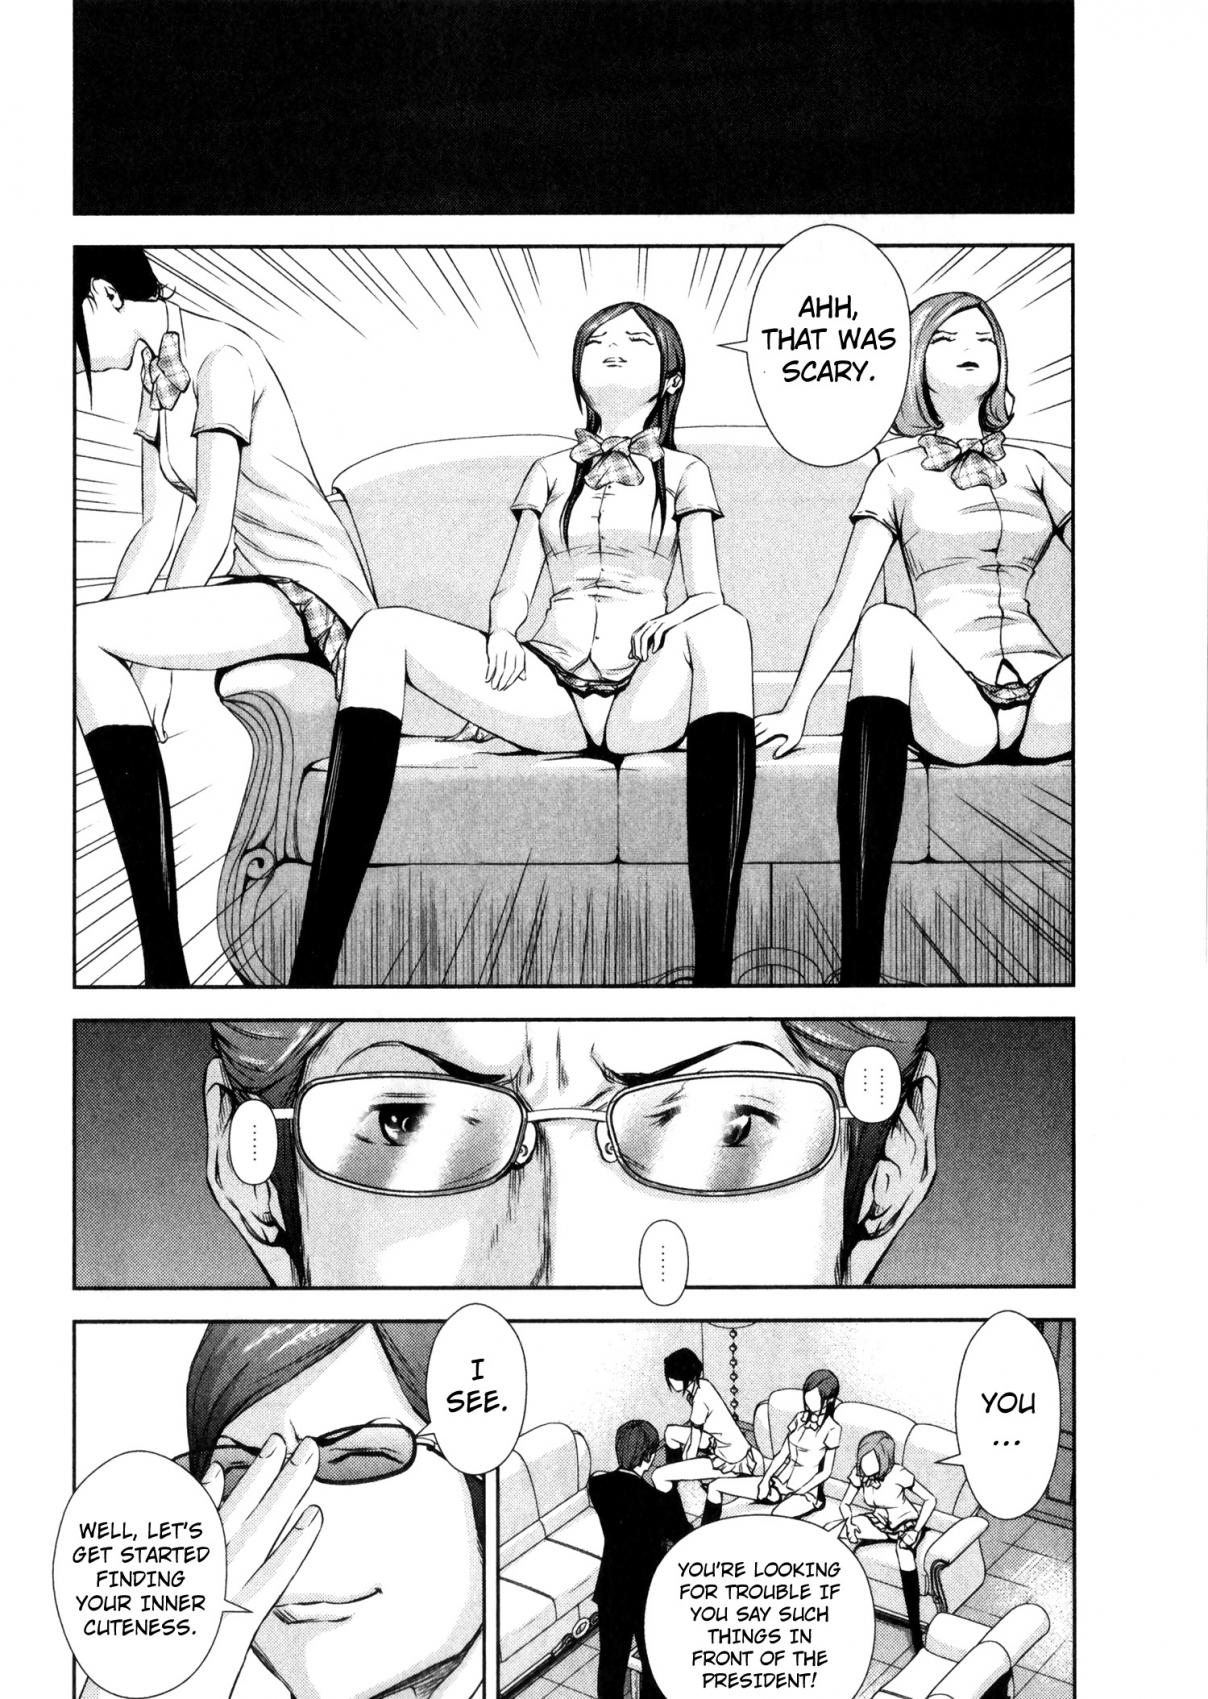 Back Street Girls Vol. 1 Ch. 3 Sweet and Sour Memories